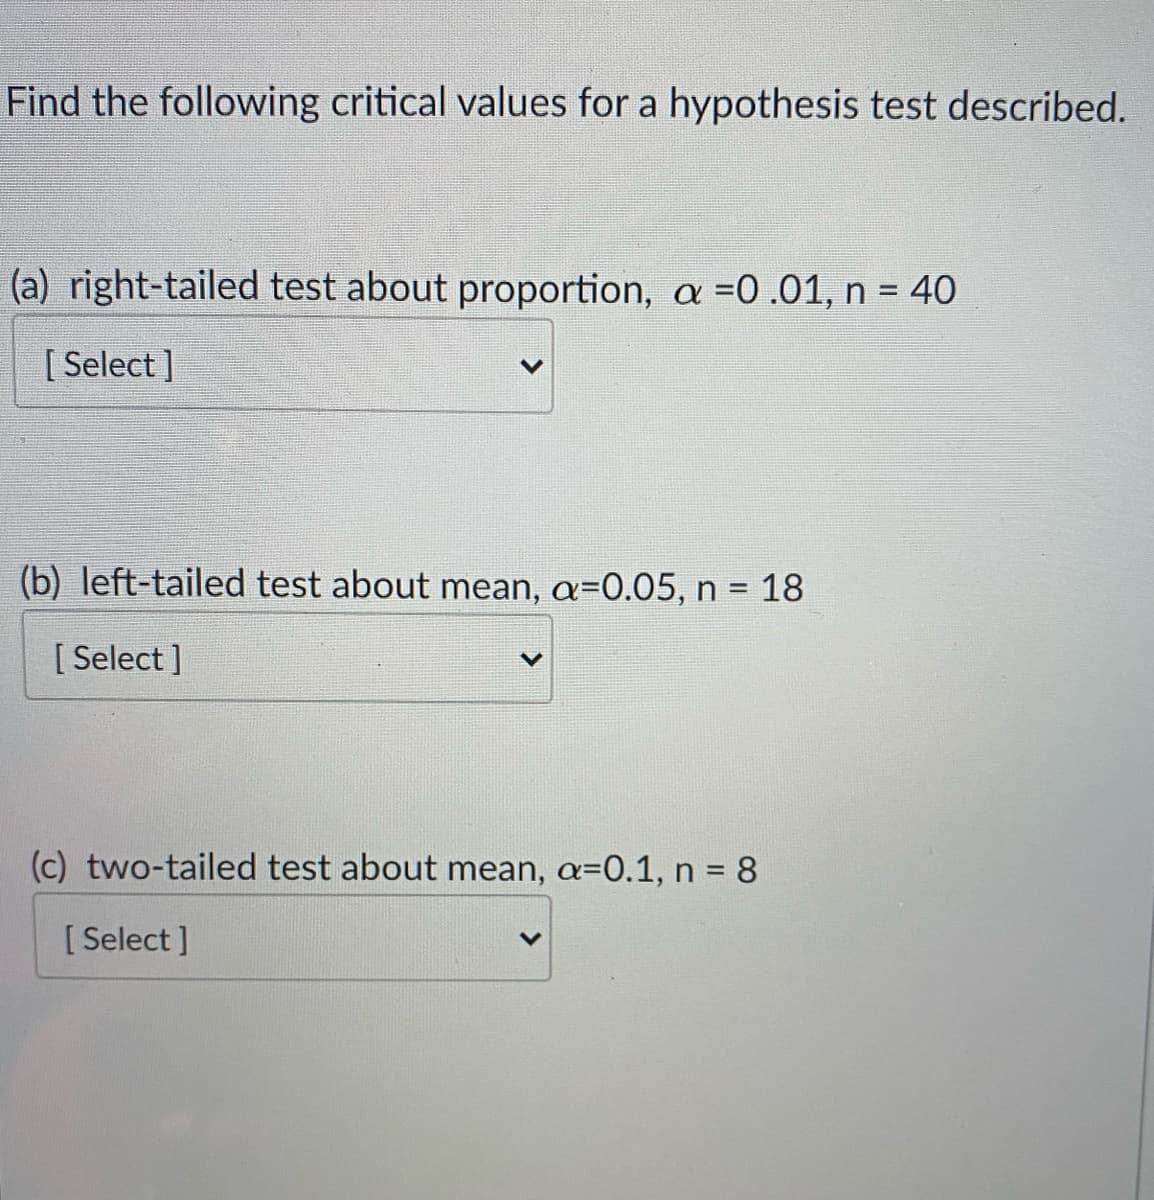 Find the following critical values for a hypothesis test described.
(a) right-tailed test about proportion, a =0.01, n = 40
[ Select ]
(b) left-tailed test about mean, a=0.05, n =
=D18
[ Select ]
(c) two-tailed test about mean, a=0.1, n = 8
[ Select ]
